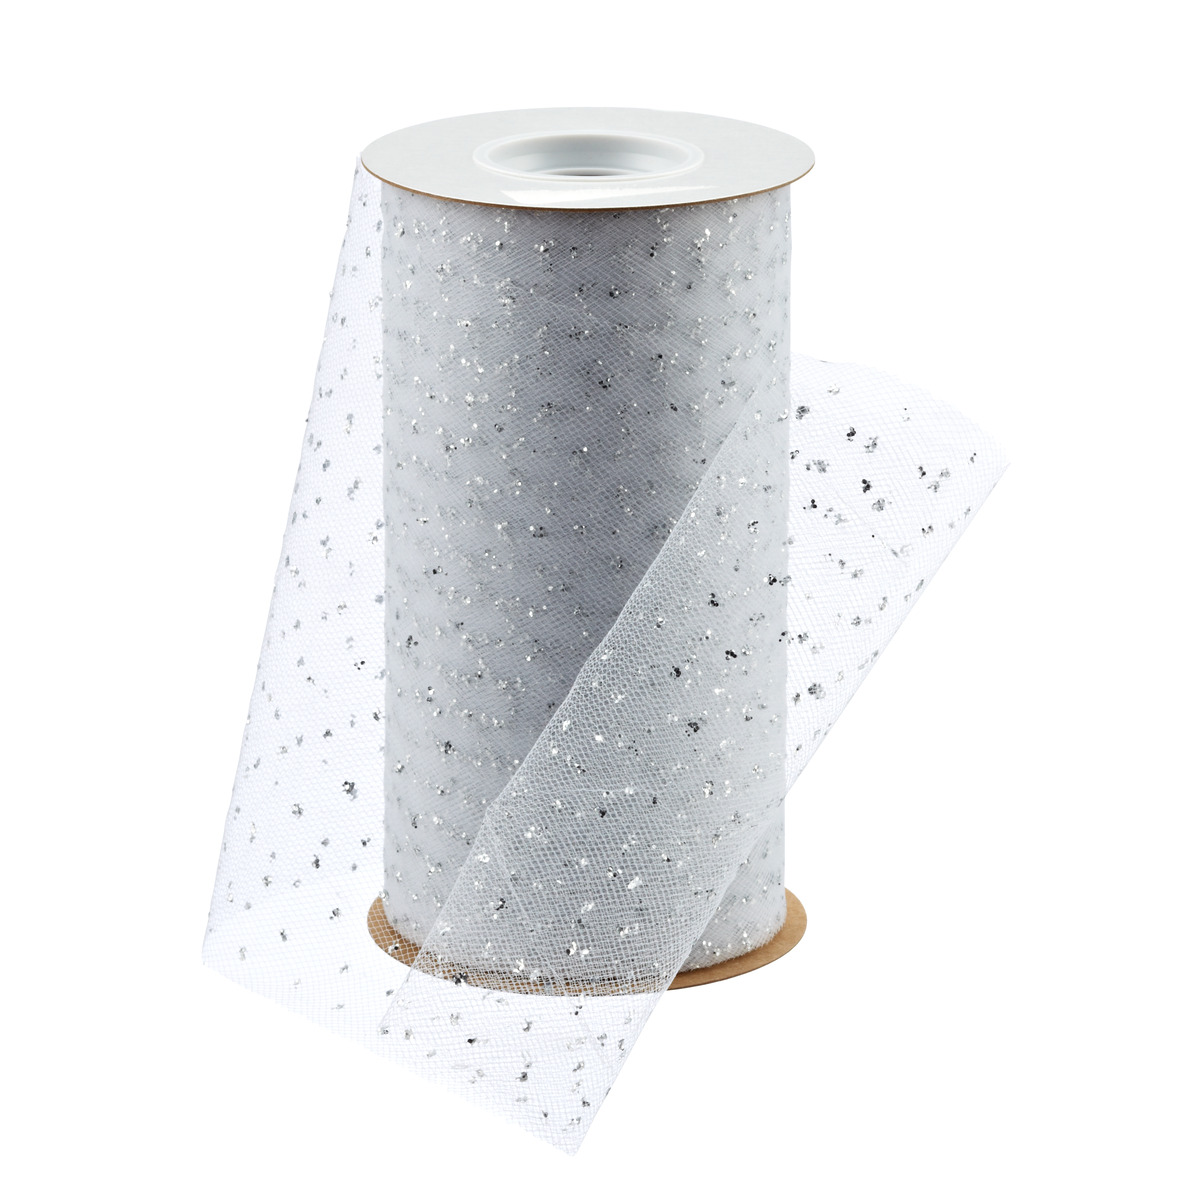 Ribbon Tulle White w/ Silver Metallic Dots, 6 x 25 yds. | The Container Store